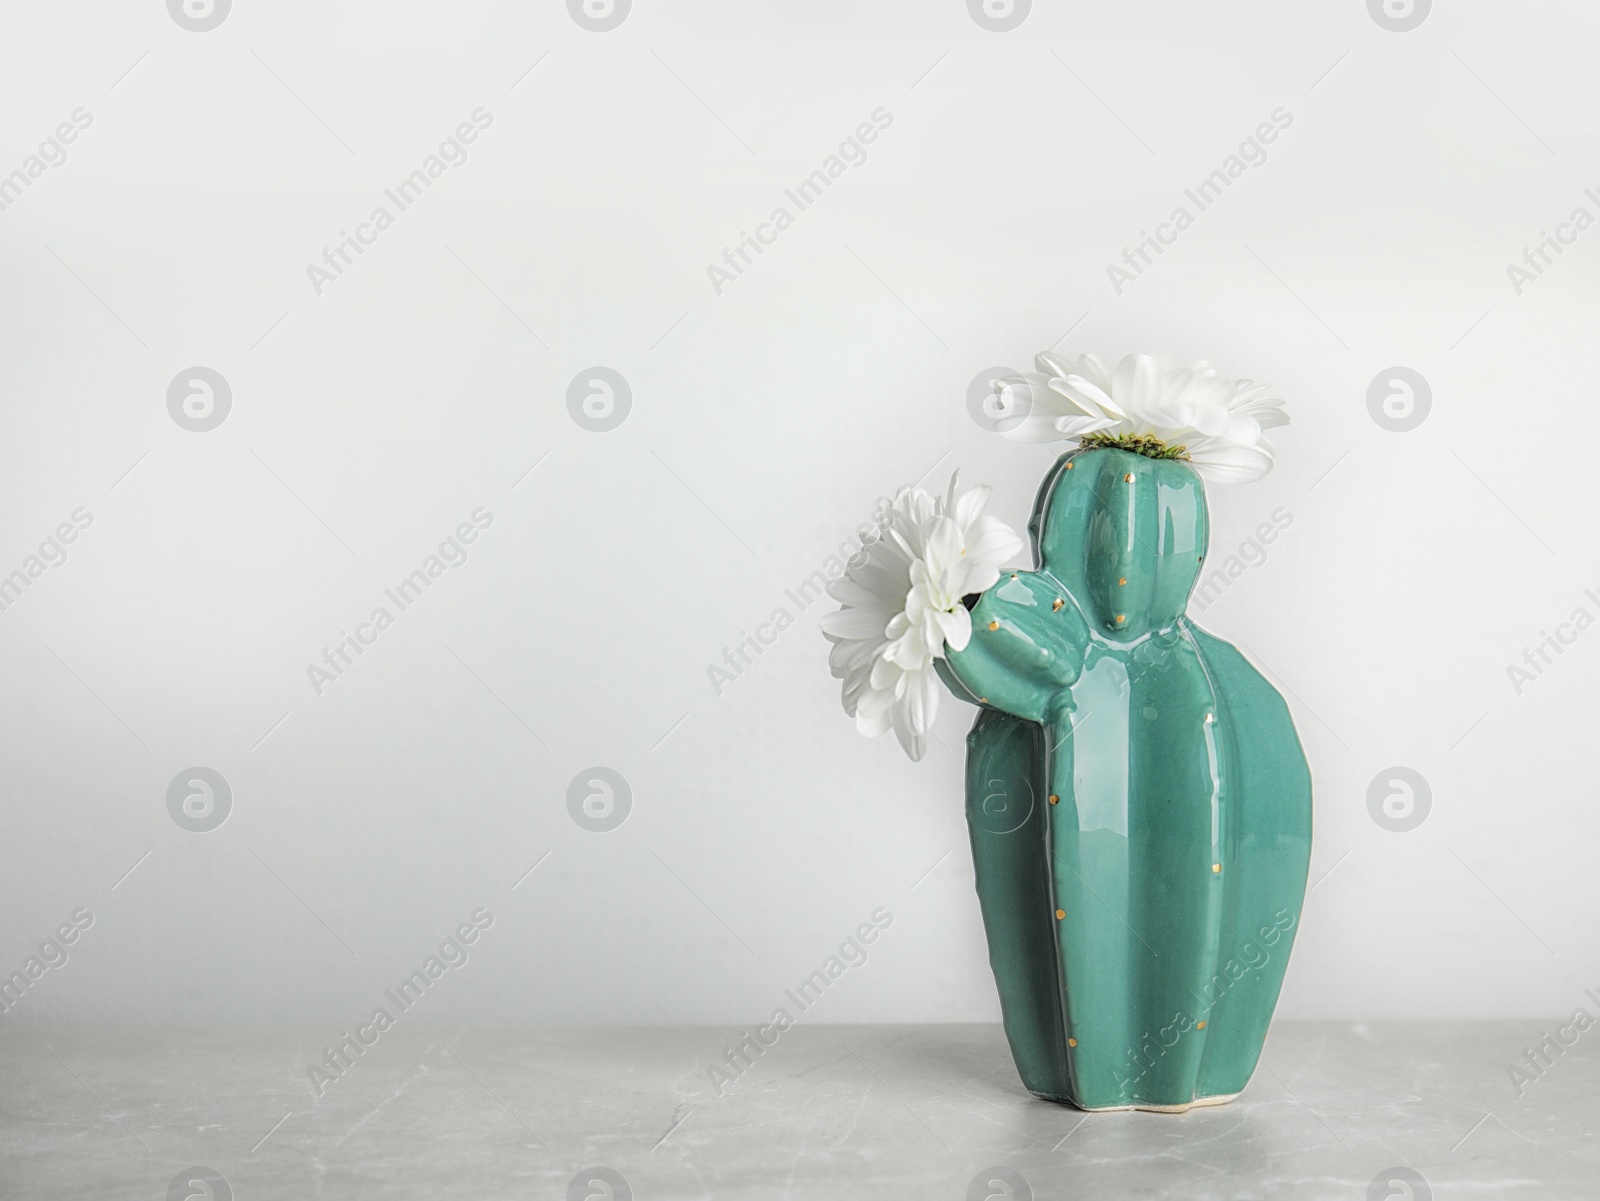 Photo of Trendy cactus shaped vase with flowers on table against light wall. Creative decor